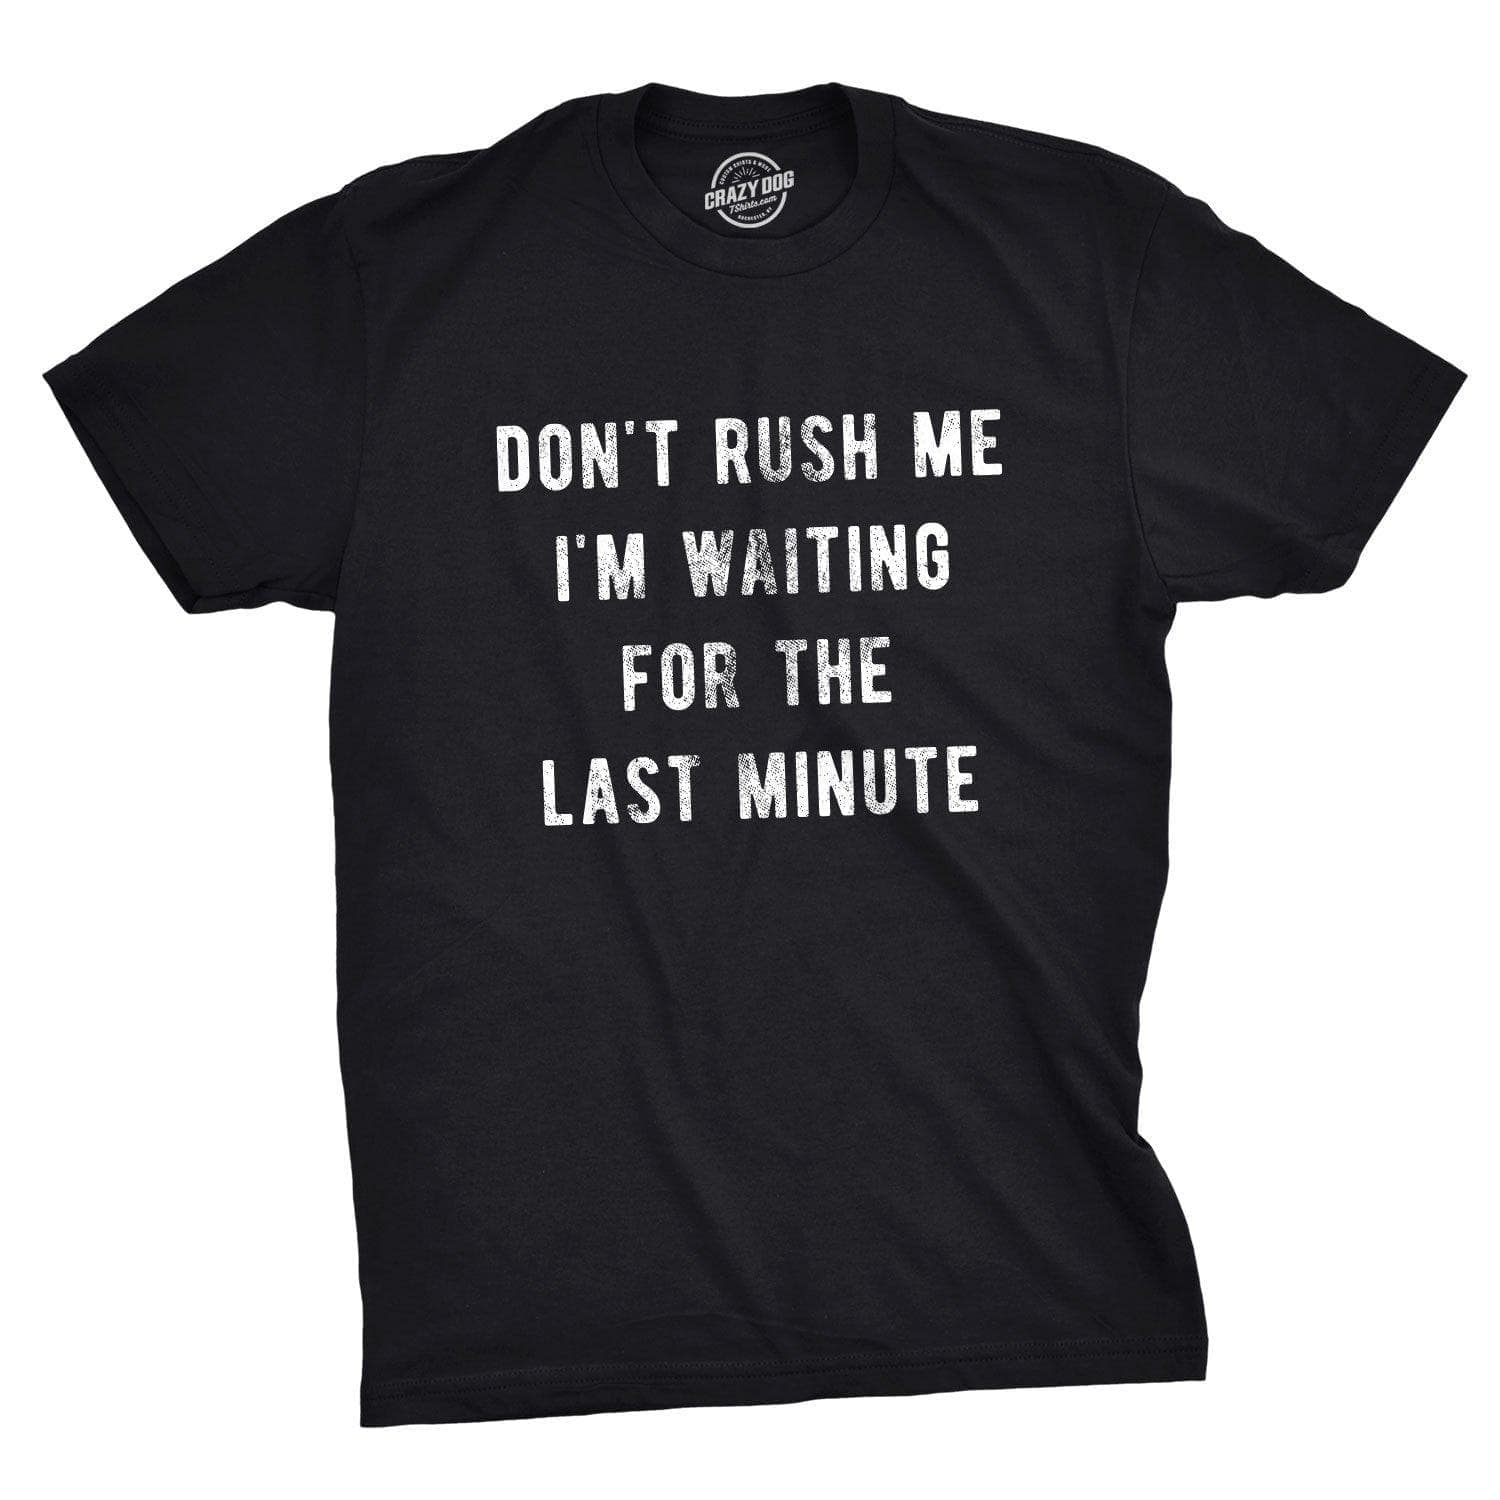 Don't Rush Me I'm Waiting For The Last Minute Men's Tshirt  -  Crazy Dog T-Shirts